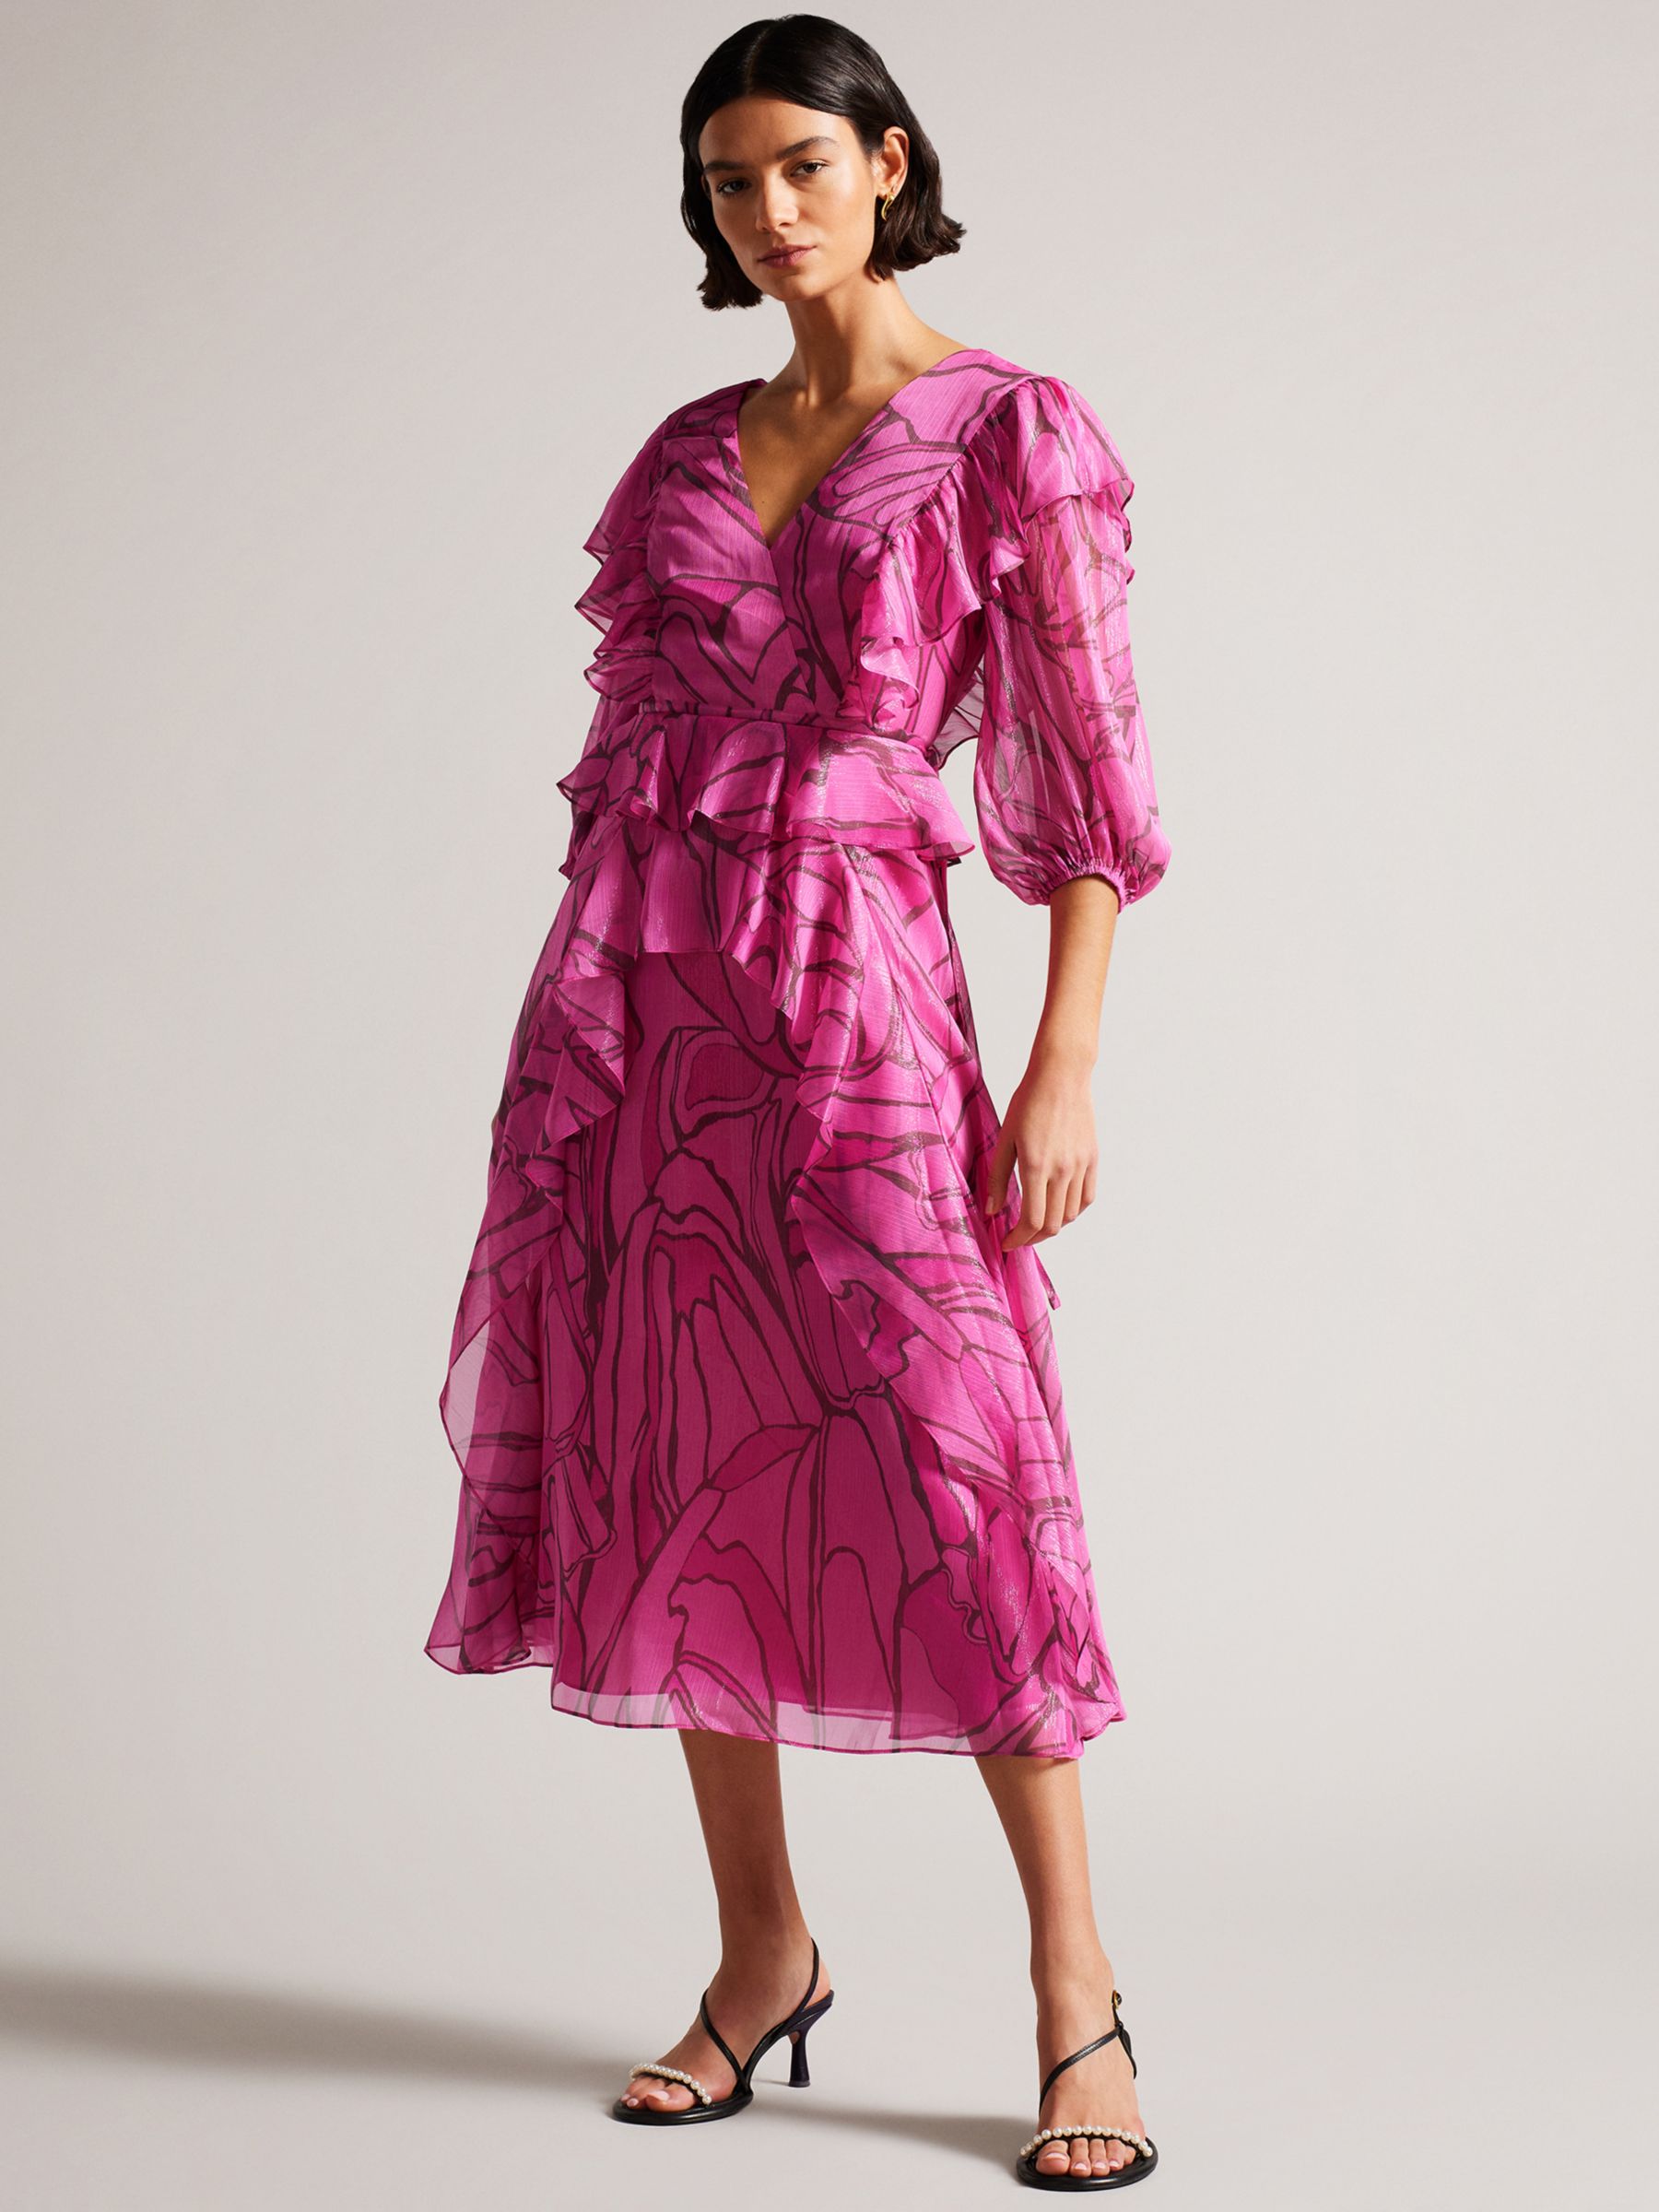 Ted Baker Occasionwear Dresses Mother of the Bride Outfits